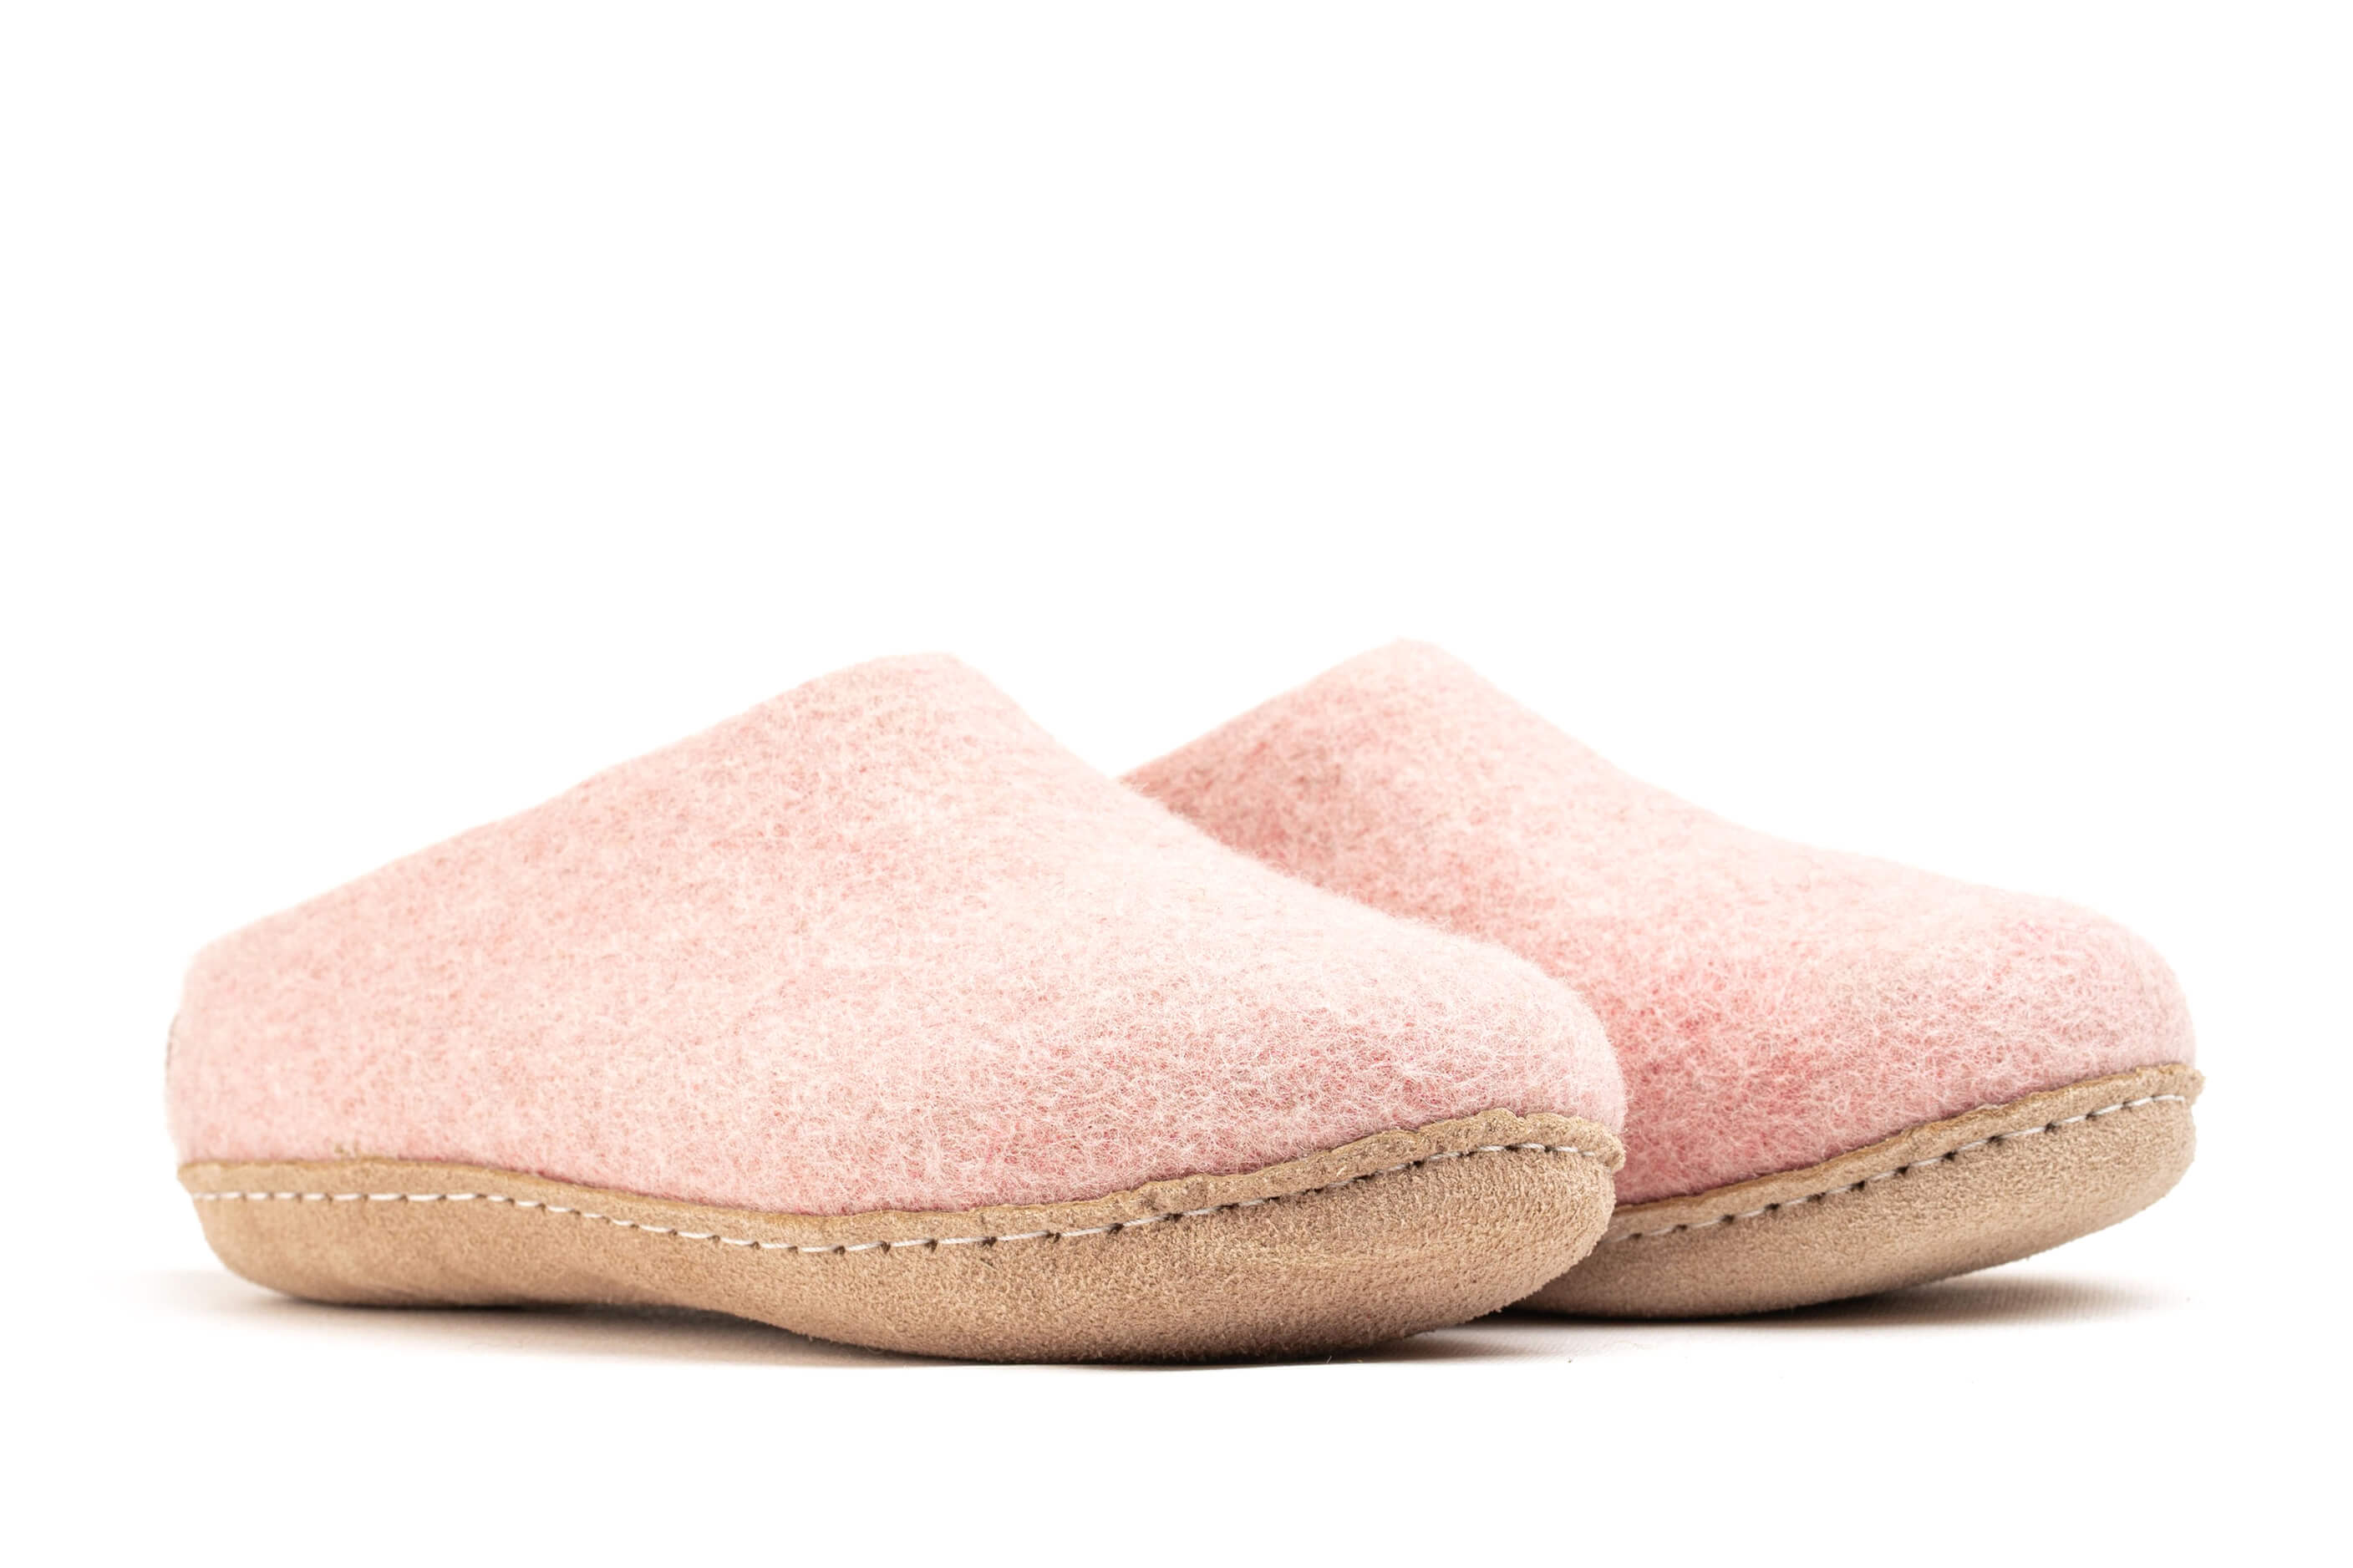 Indoor Open Heel Slippers With Leather Sole - Baby Pink